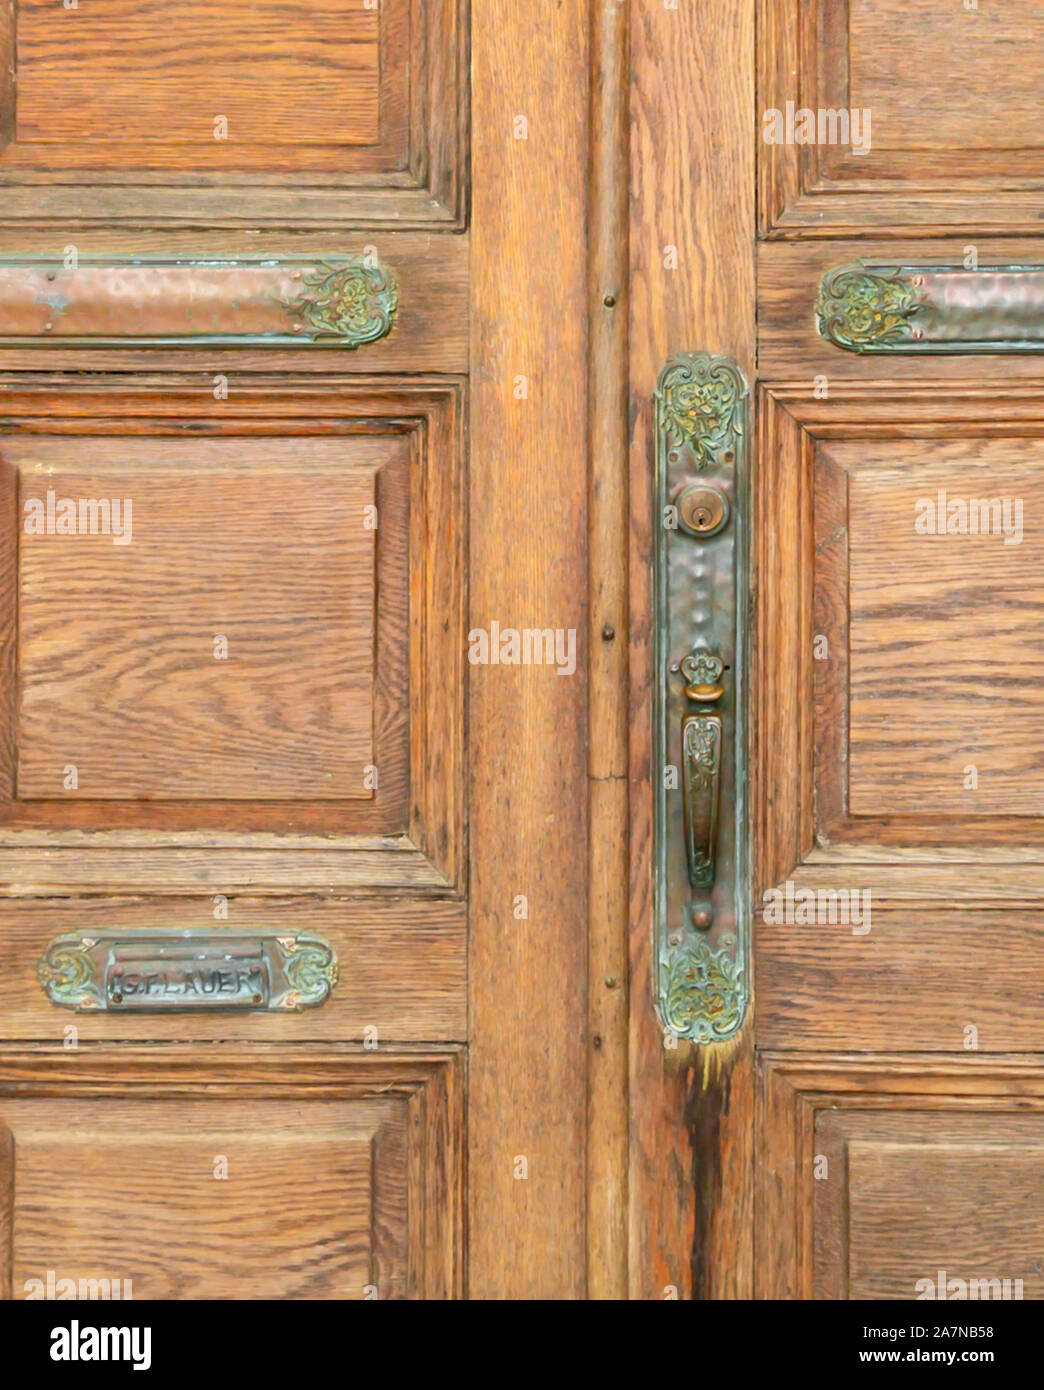 Old elaborate wooden doors with hardware Stock Photo